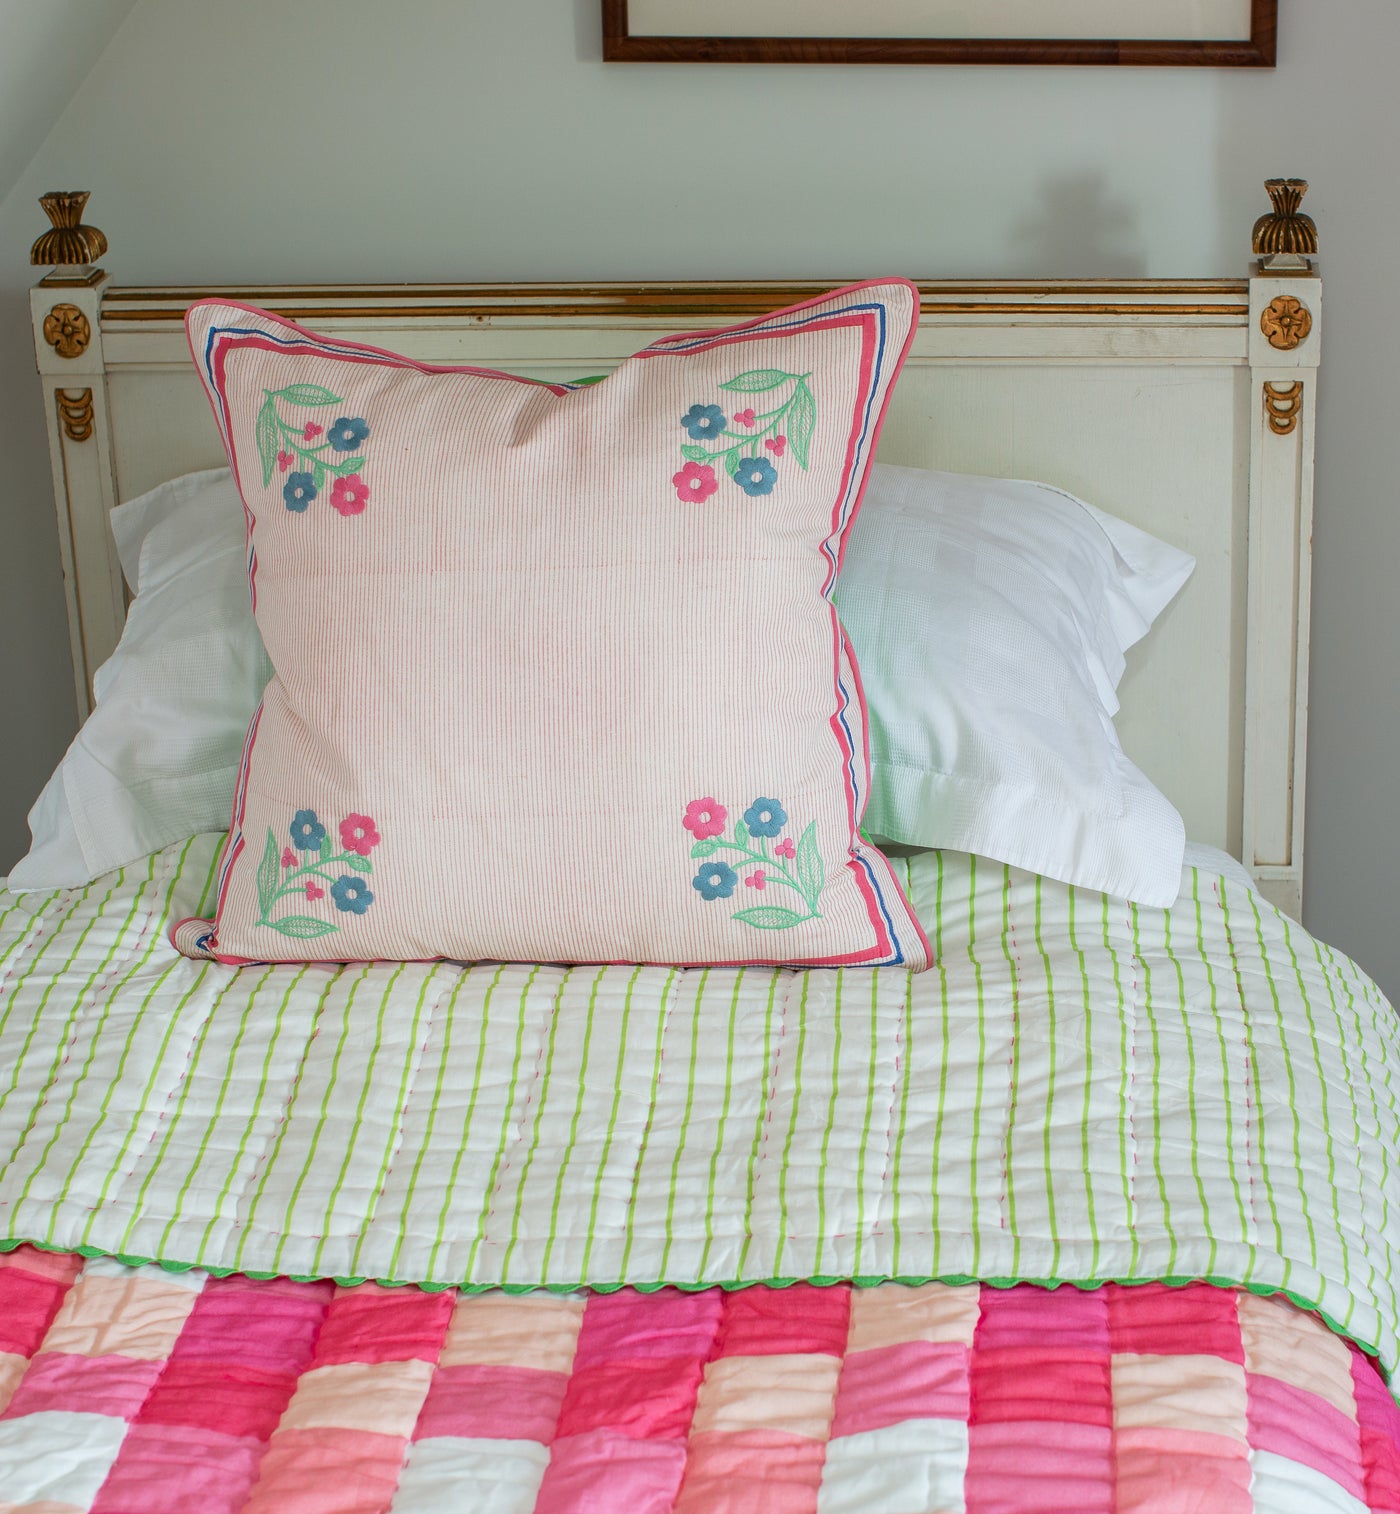 Daphne Embroidered Floral Square Cushion - Pink & Green